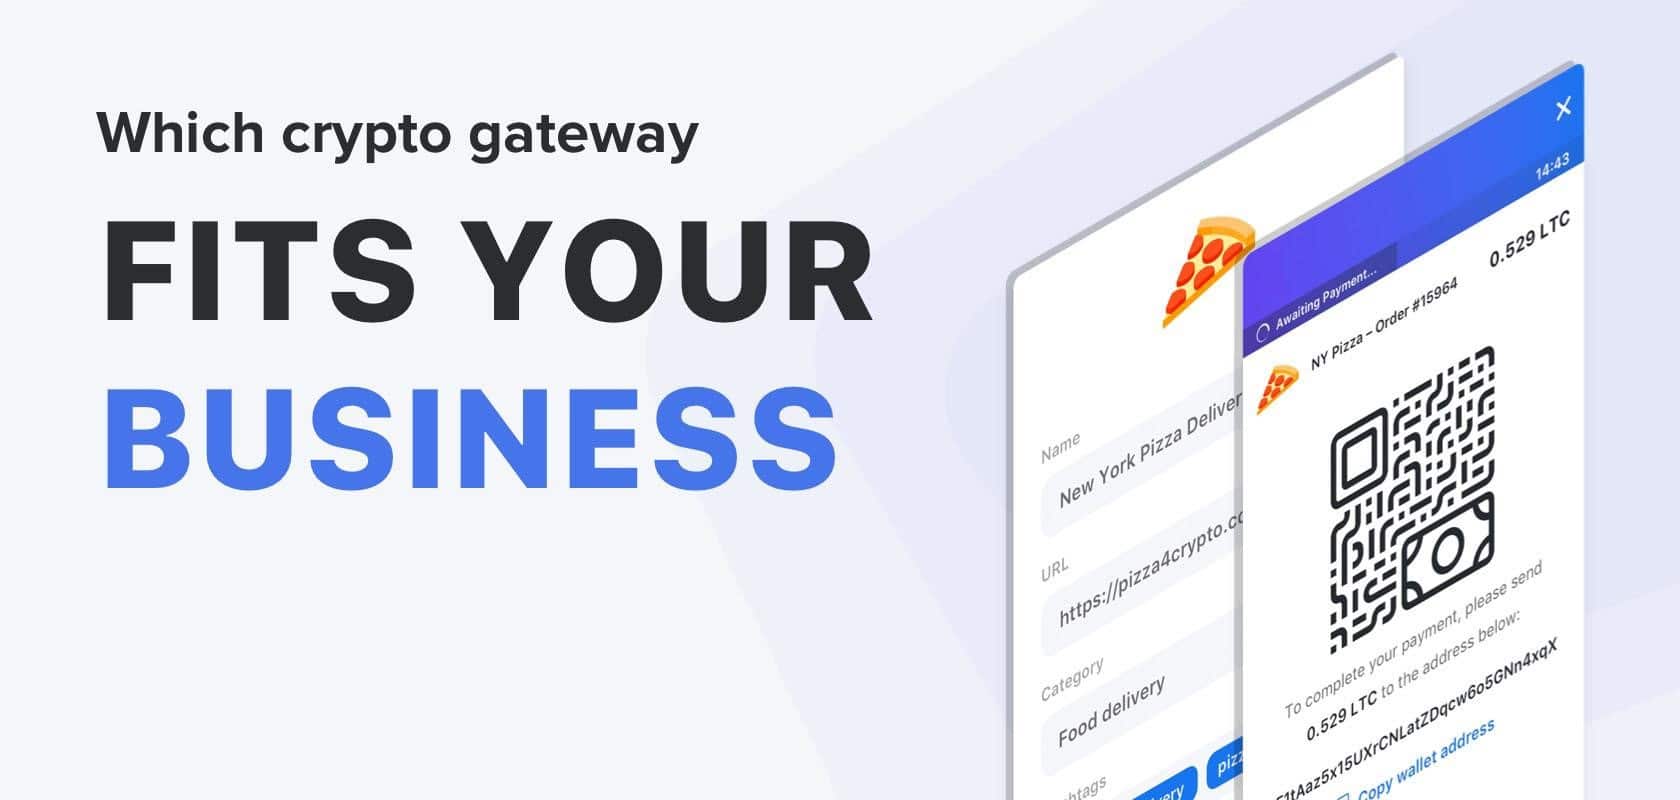 Which Cryptocurrency Gateway Fits Your Business Needs